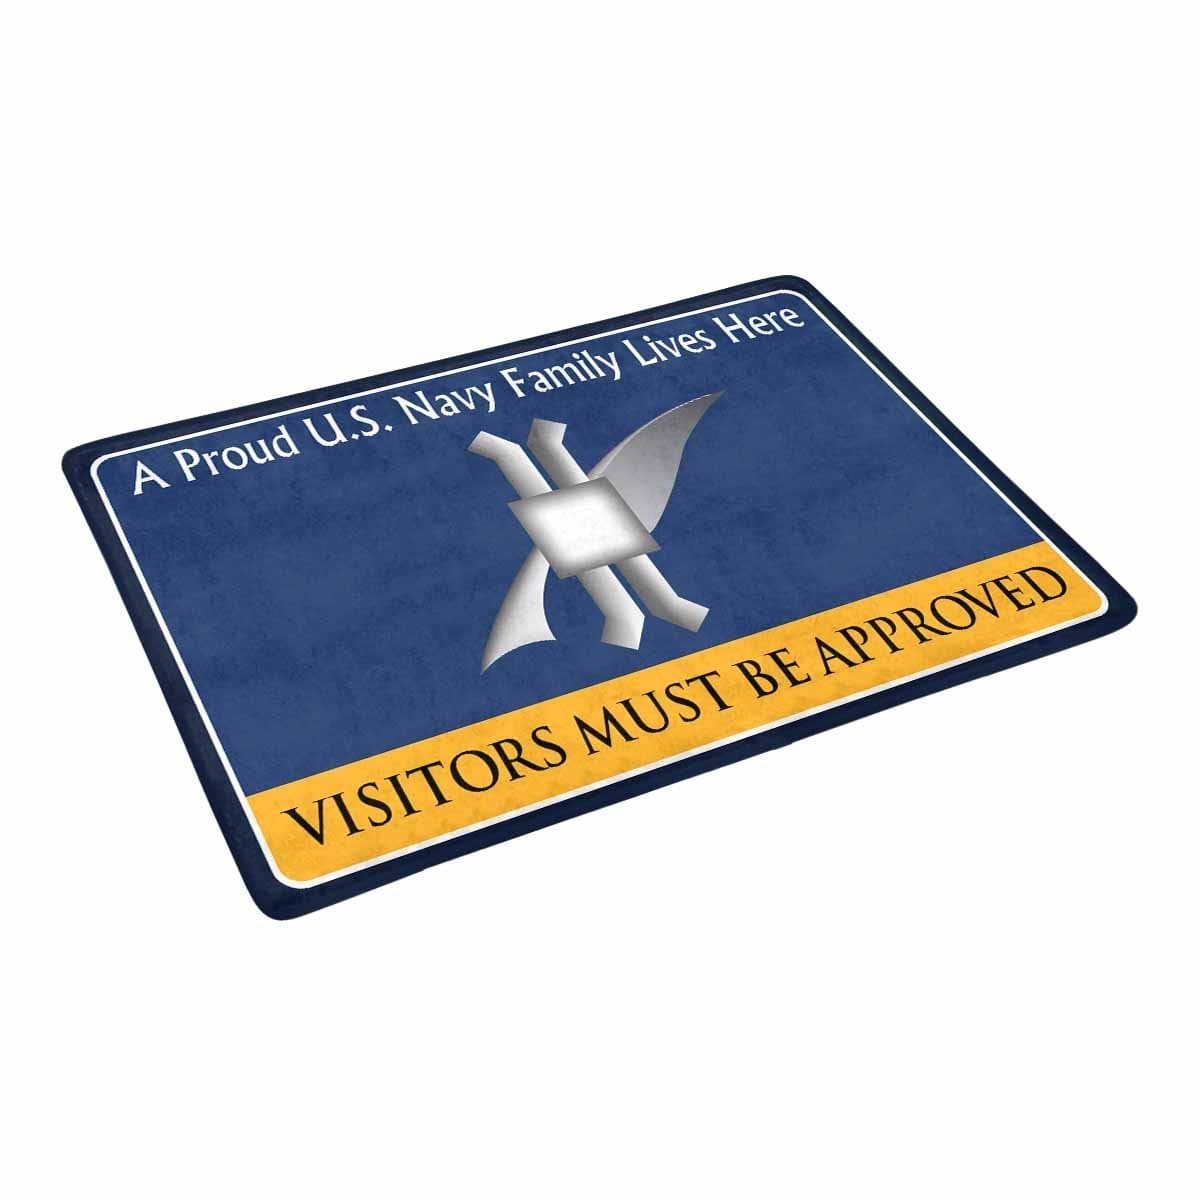 Navy Legalman Navy LN Family Doormat - Visitors must be approved (23,6 inches x 15,7 inches)-Doormat-Navy-Rate-Veterans Nation